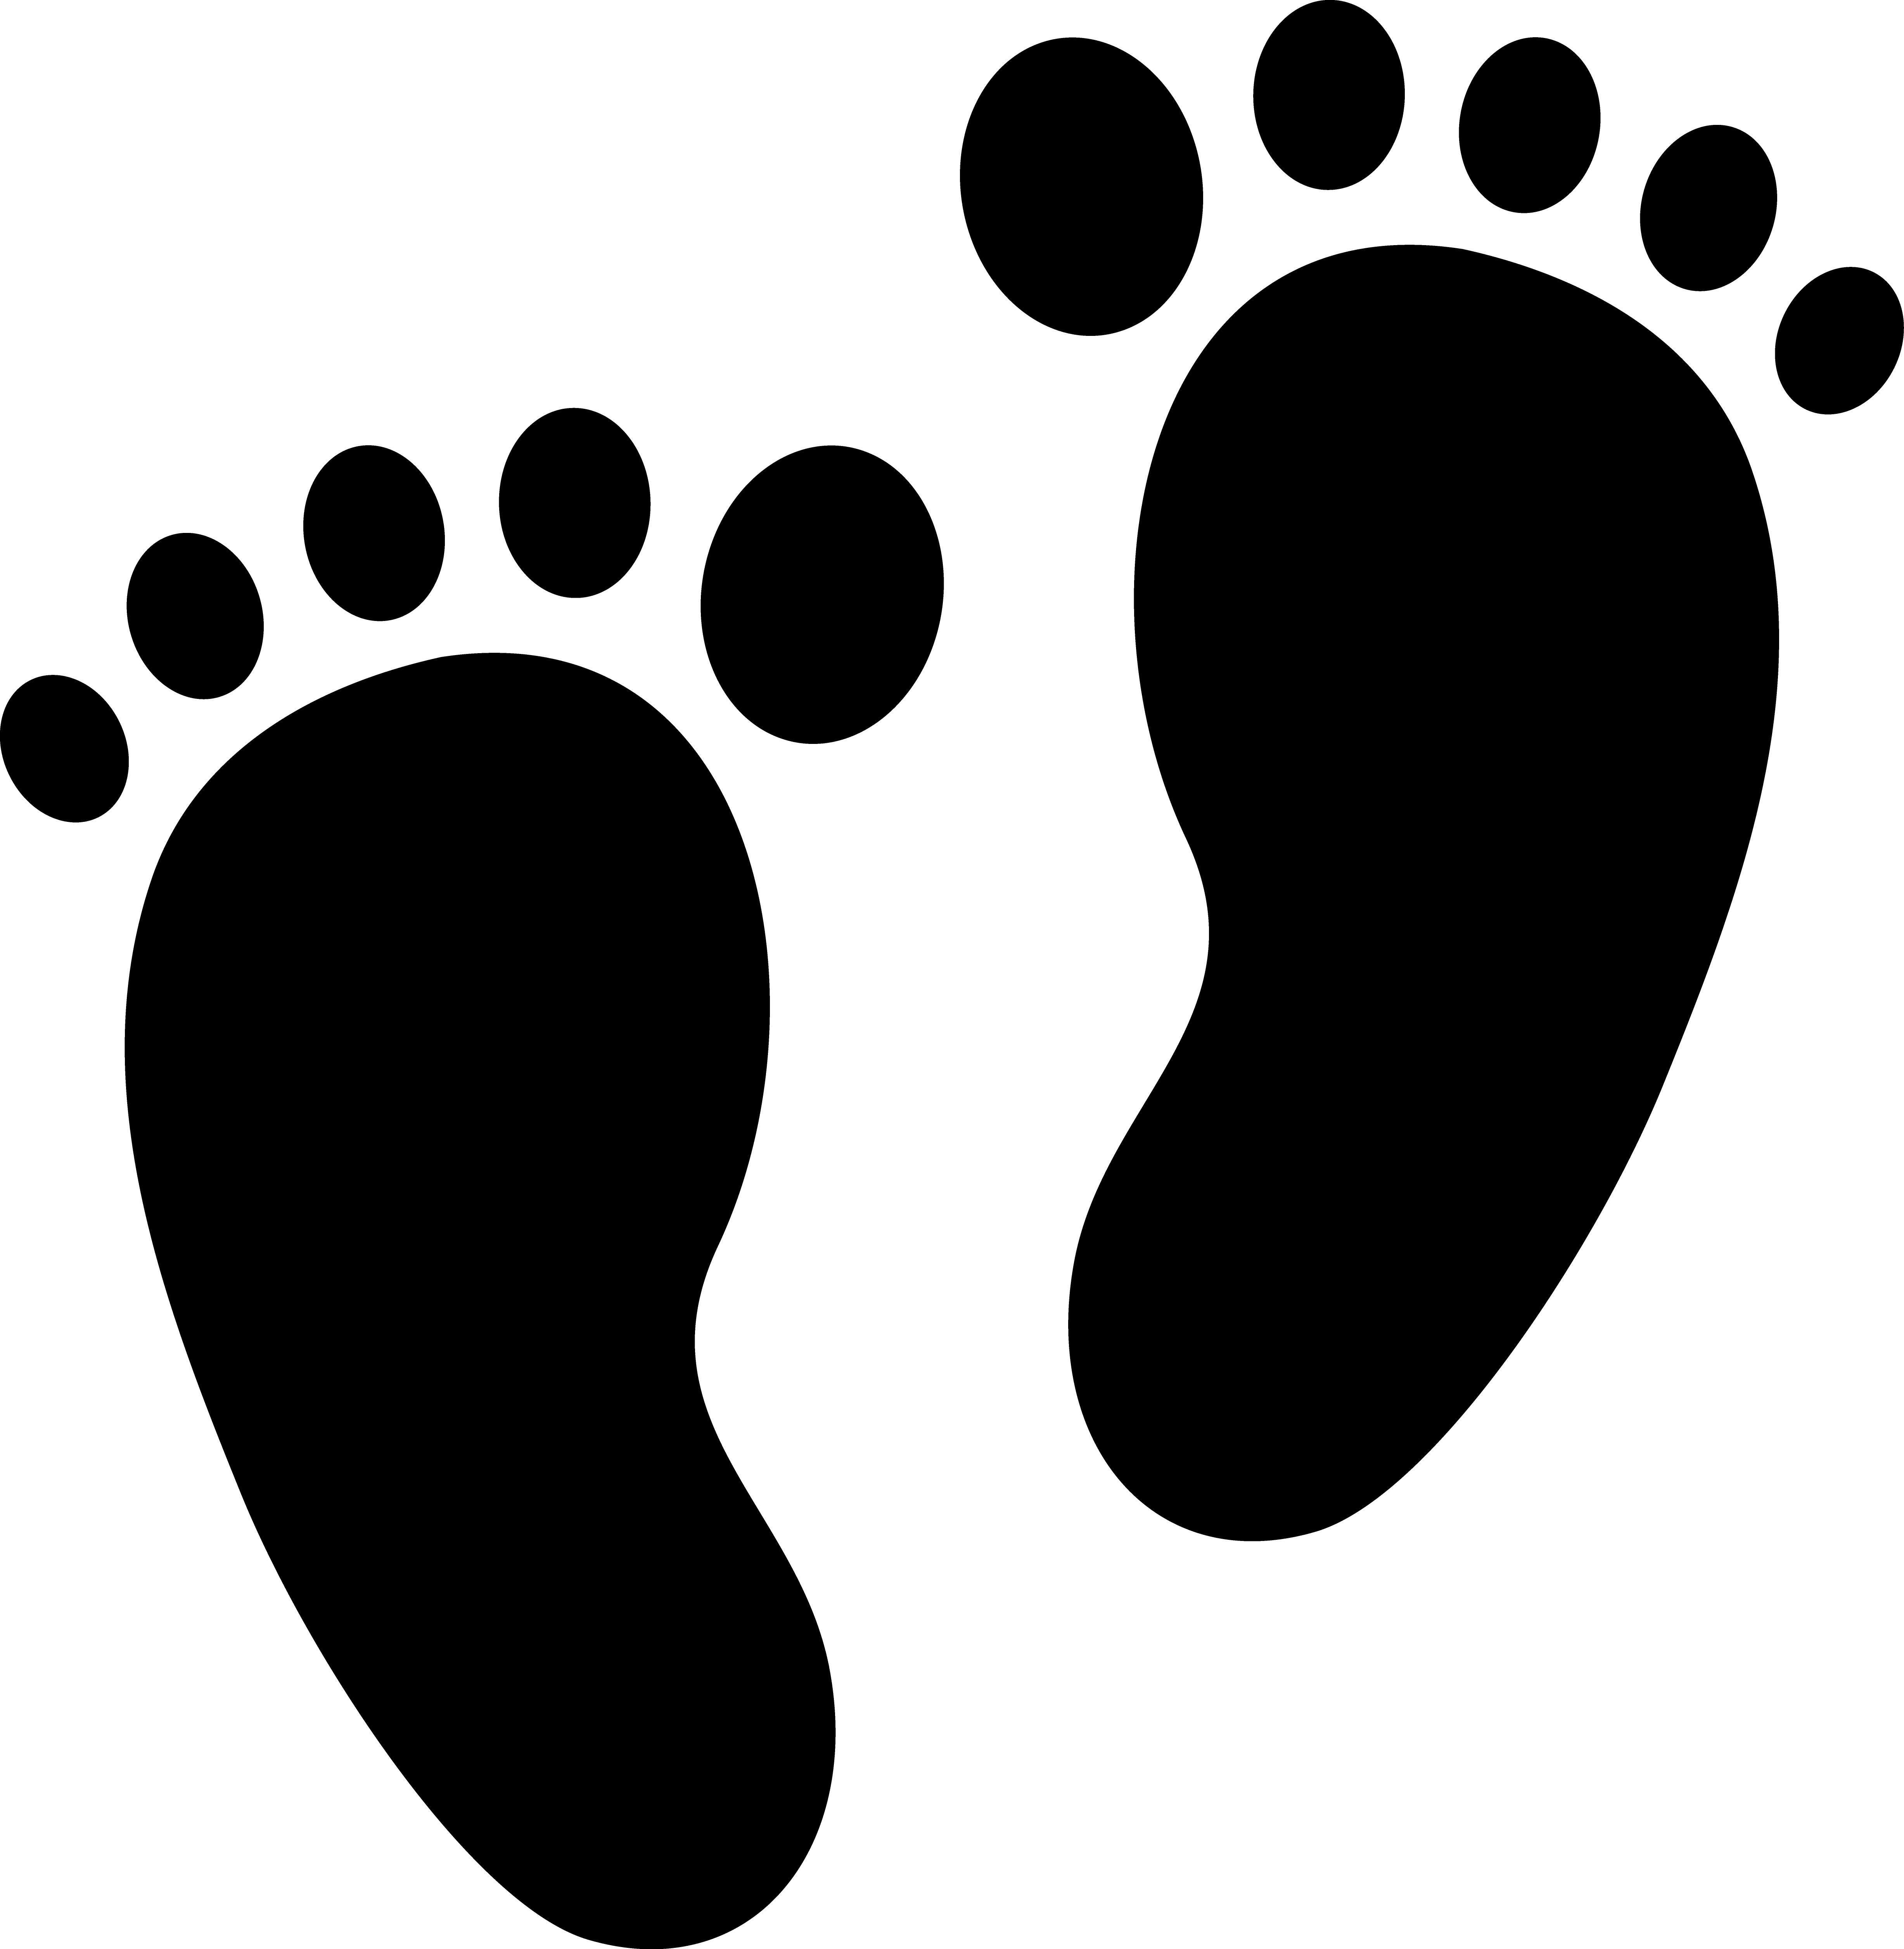 Baby Feet Silhouette at GetDrawings.com | Free for ...